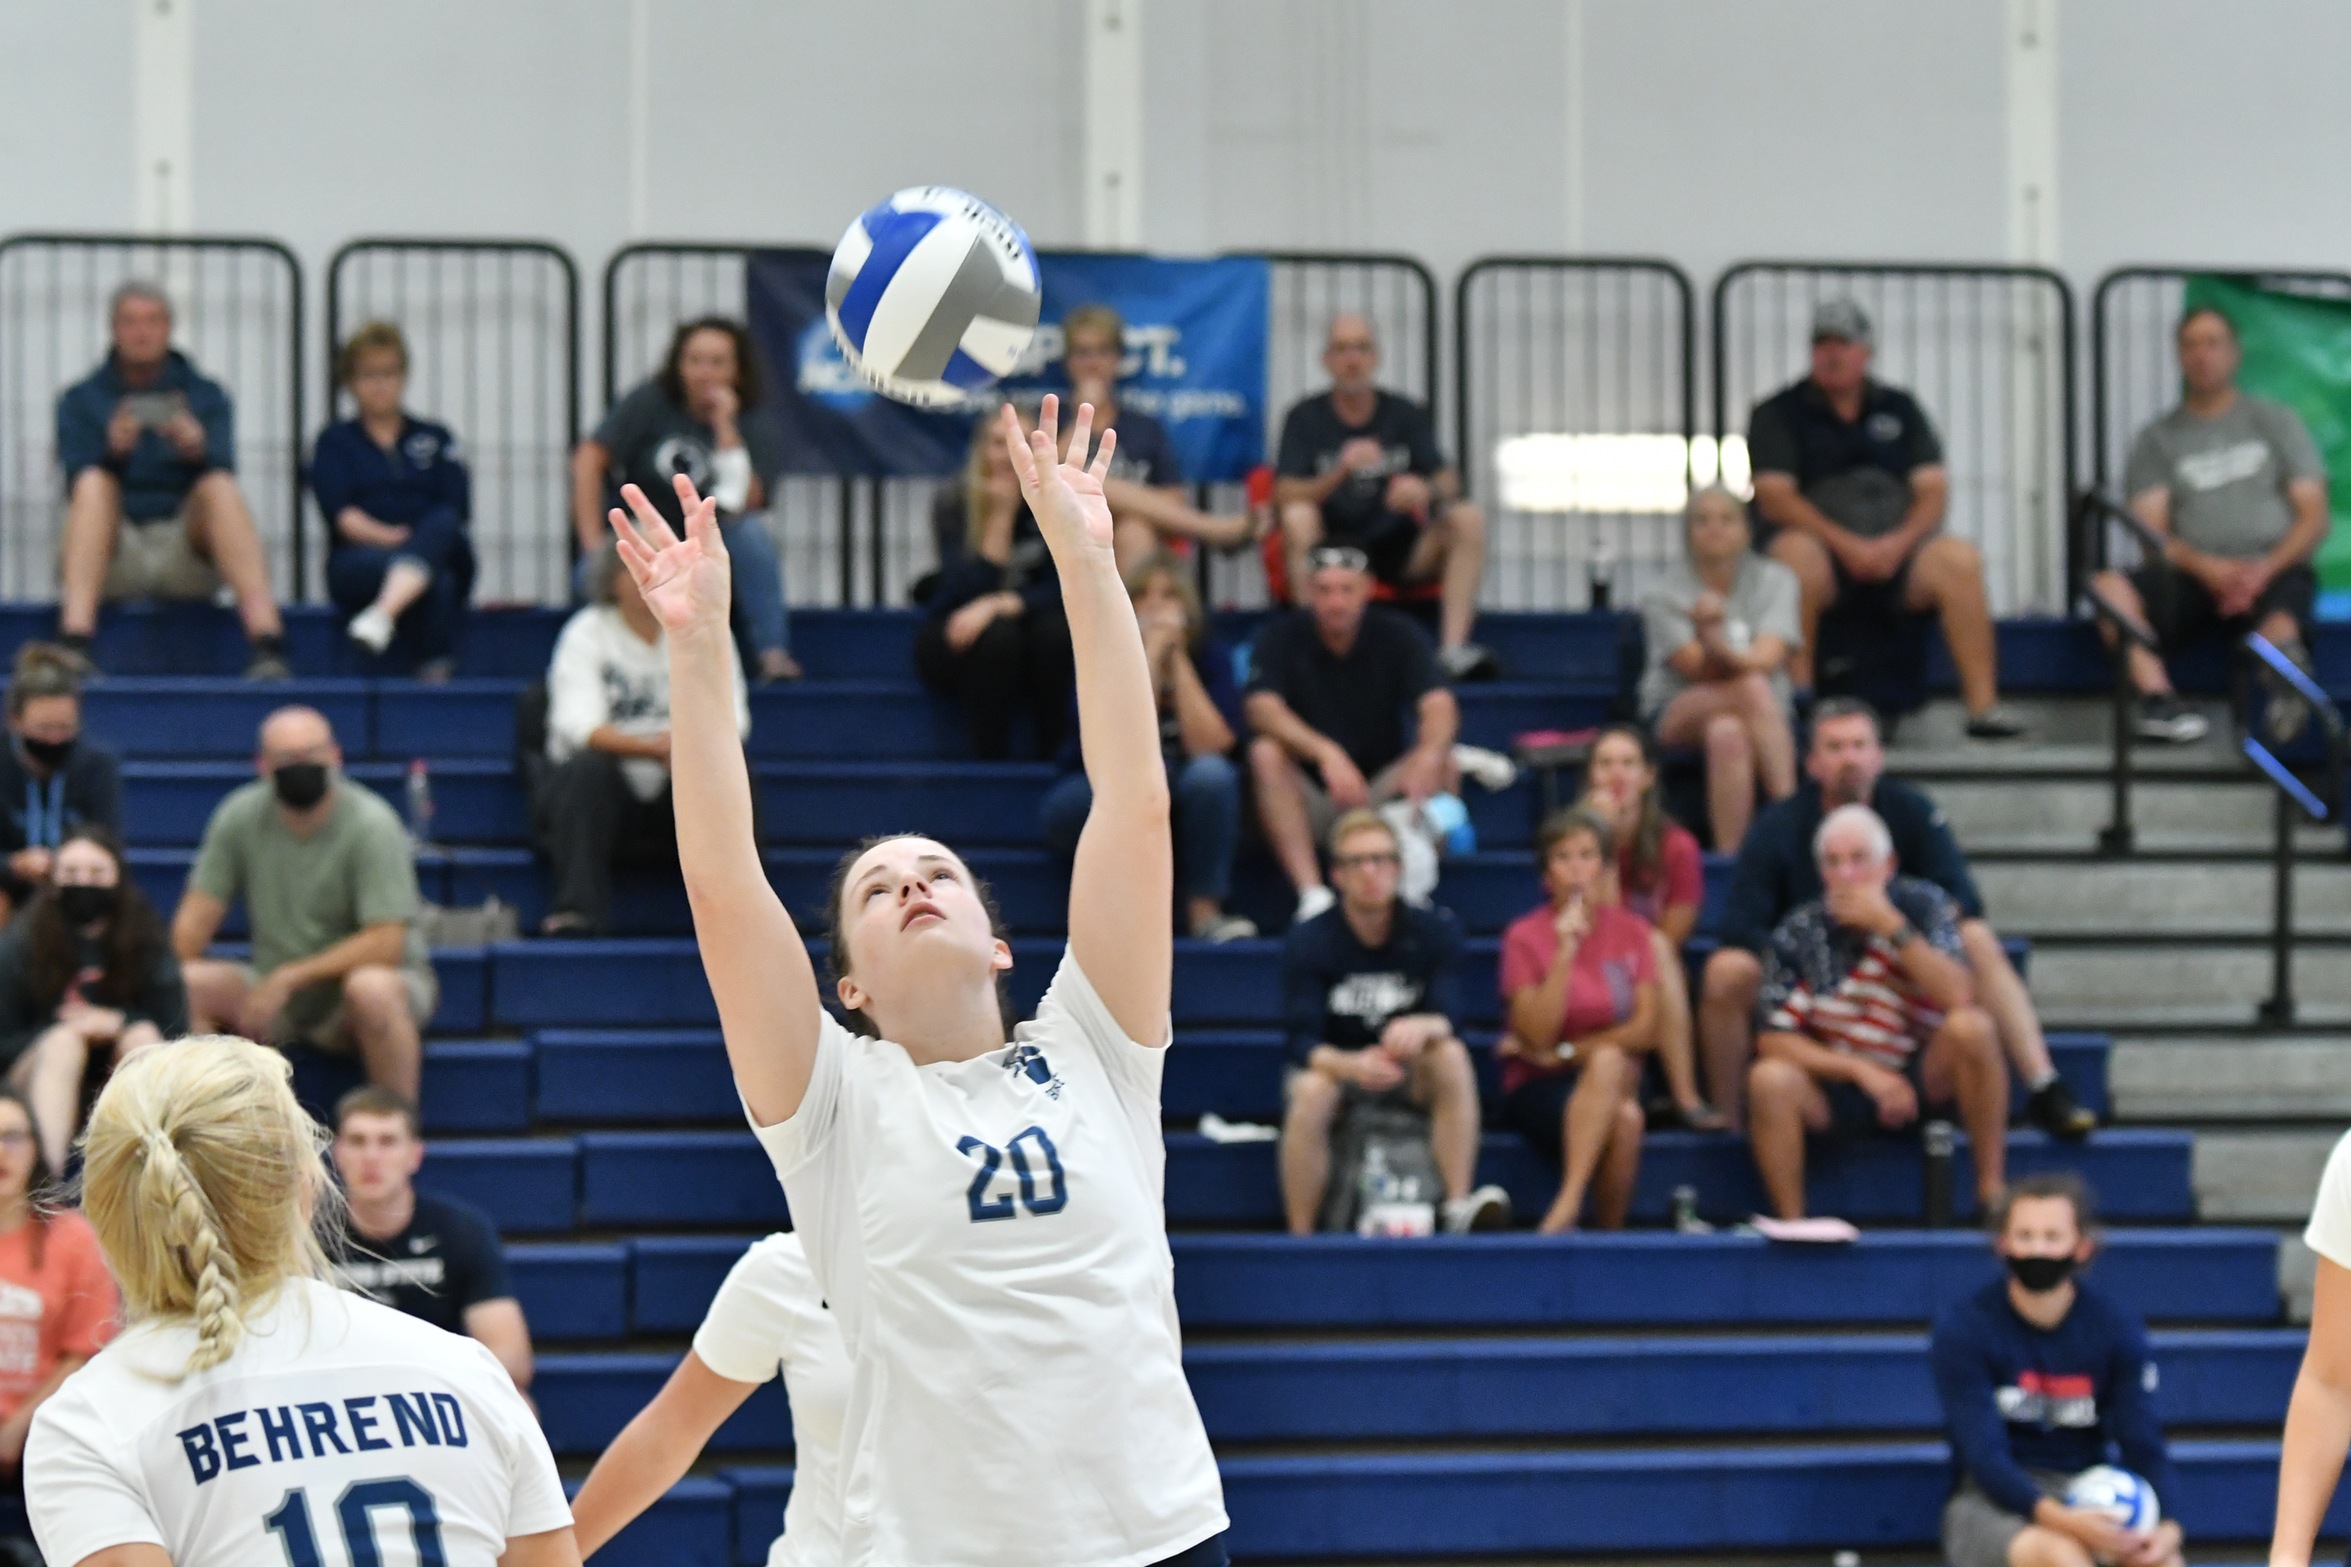 Women's Volleyball Splits at Wooster